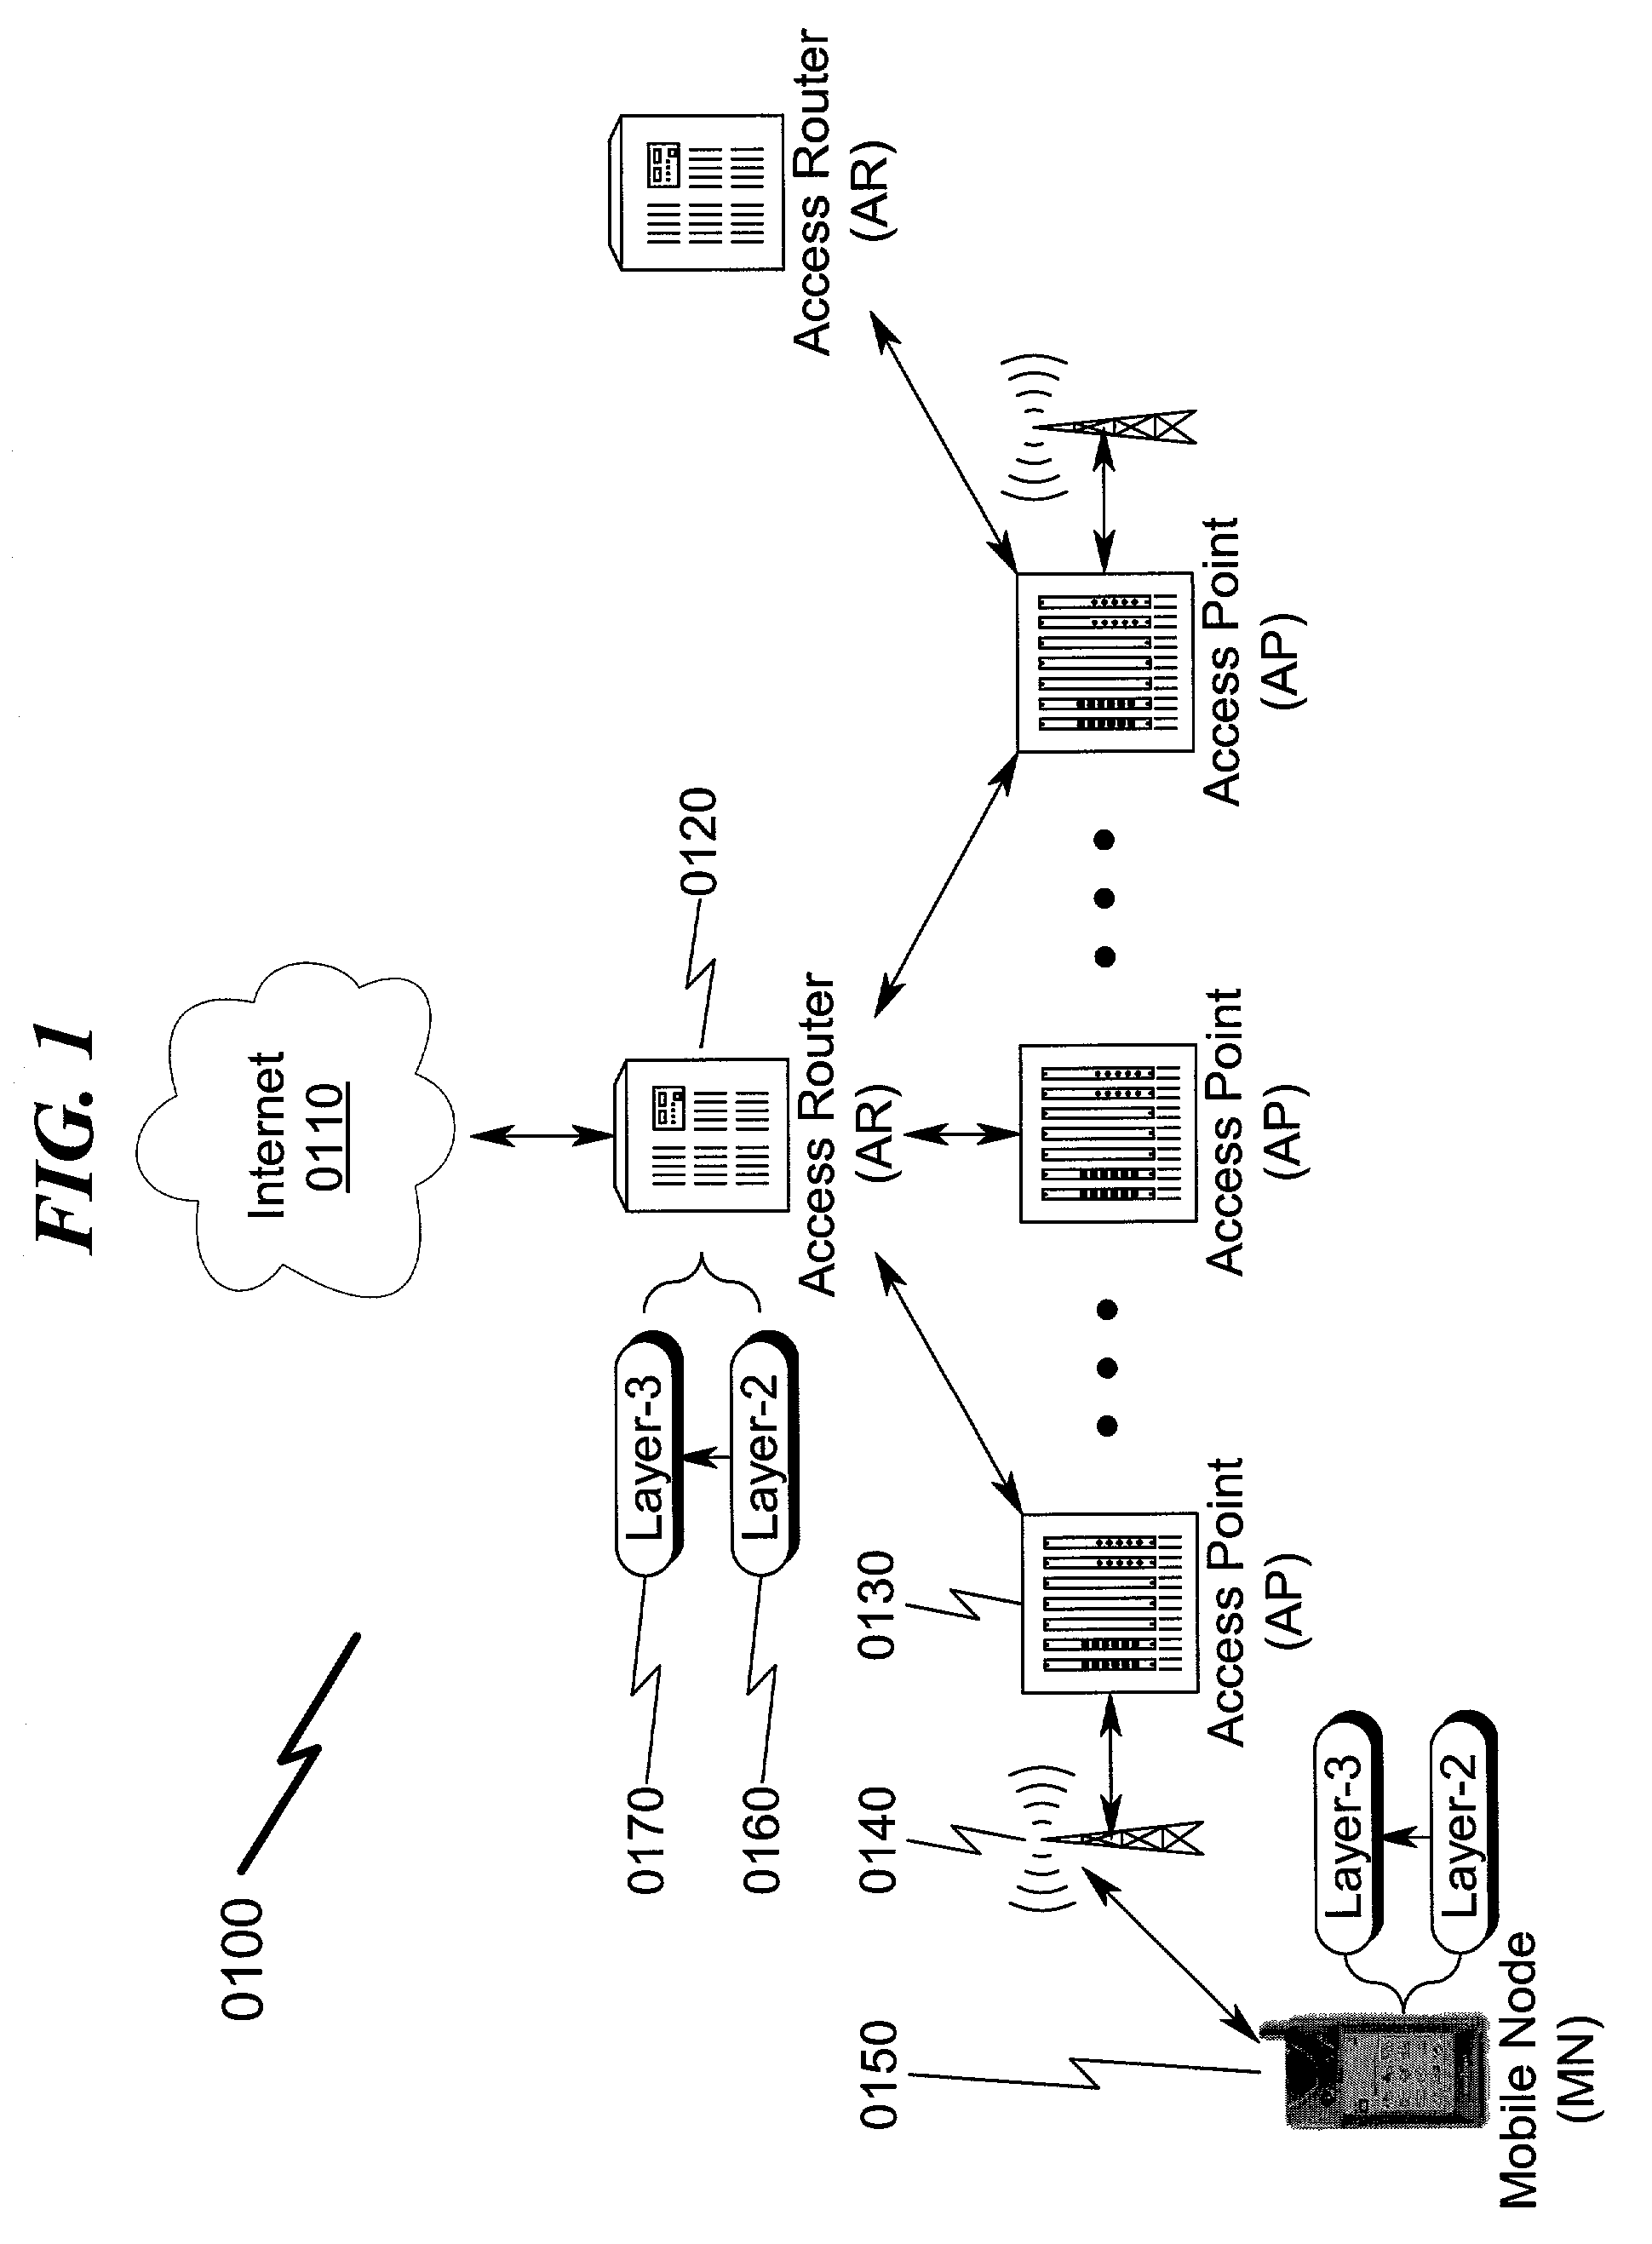 Network paging system and method